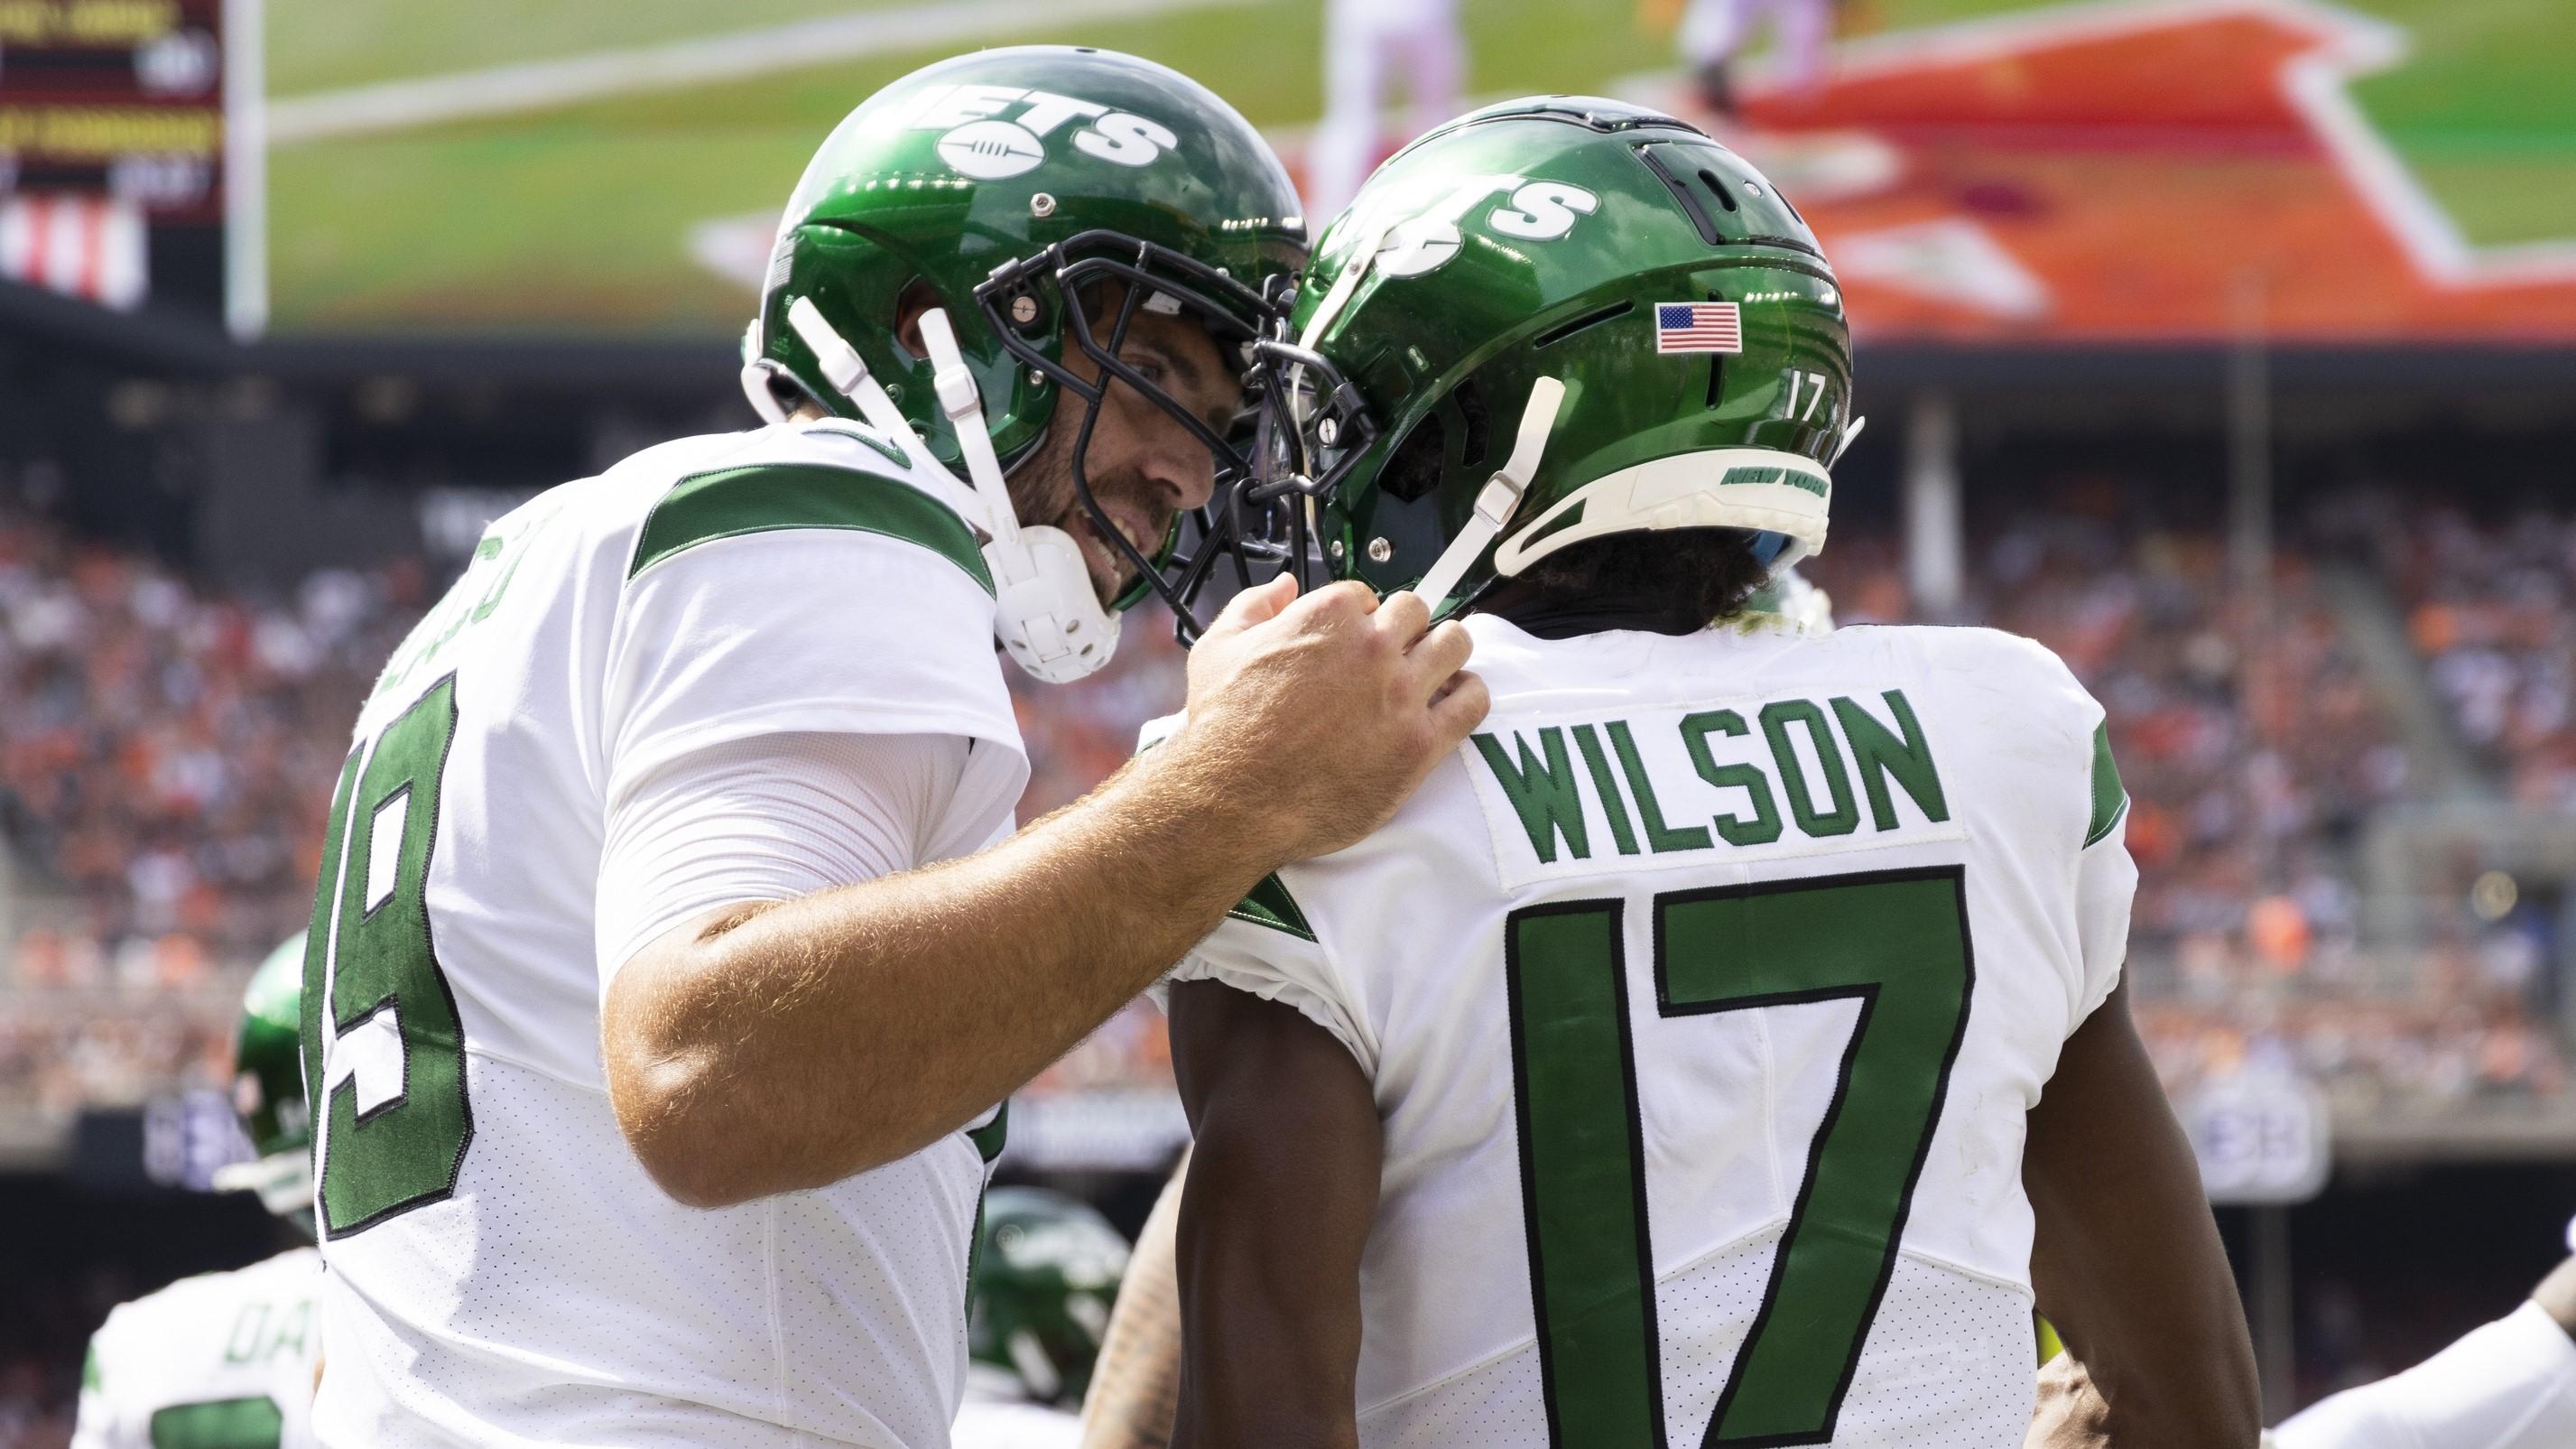 Sep 18, 2022; Cleveland, Ohio, USA; New York Jets quarterback Joe Flacco (19) congratulates wide receiver Garrett Wilson (17) on his touchdown reception during the second quarter against the Cleveland Browns at FirstEnergy Stadium. / Scott Galvin-USA TODAY Sports